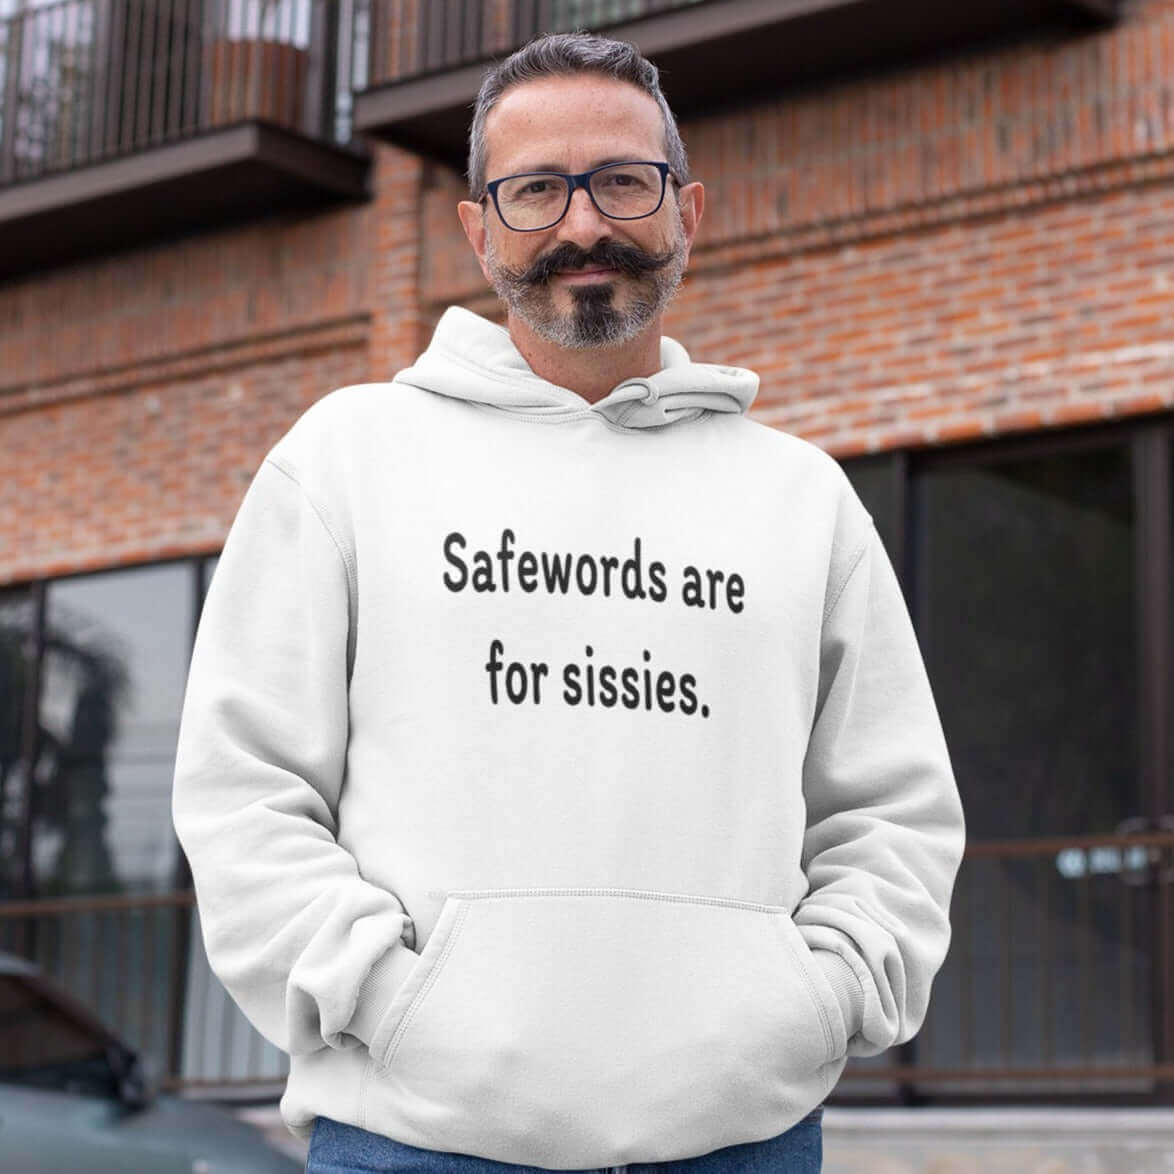 Man wearing a white hoodie sweatshirt with the phrase Safewords are for sissies printed on the front.